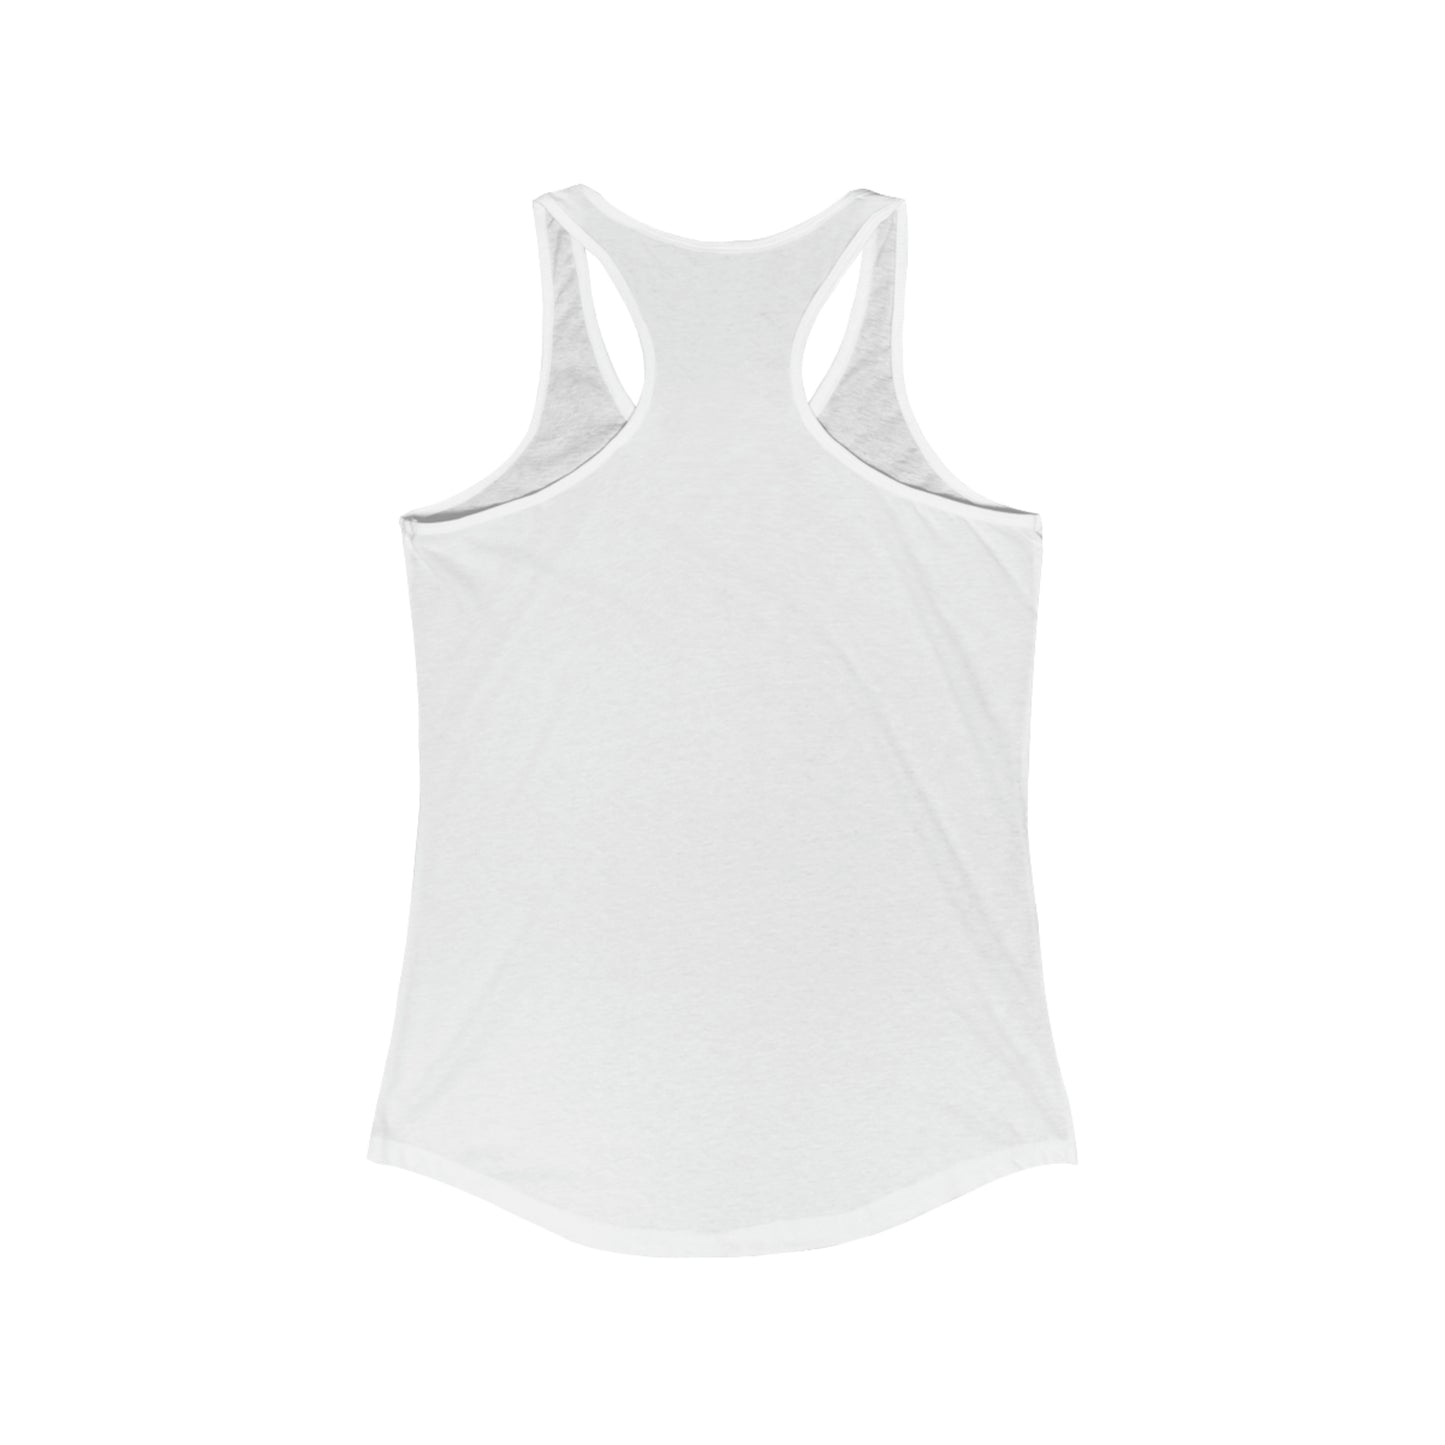 NEW Stay Humble Women's Ideal Racerback Tank